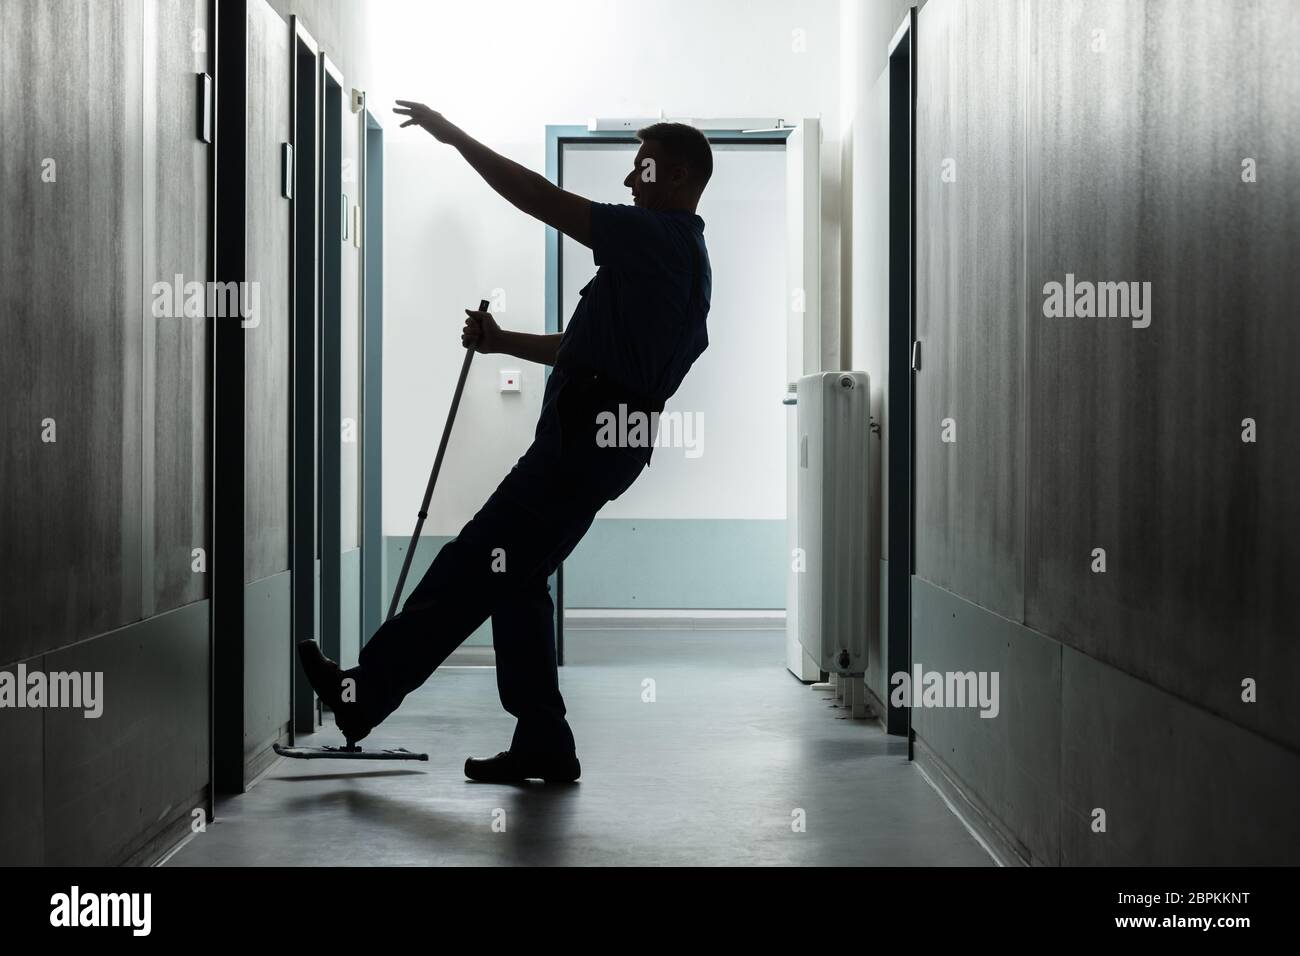 Silhouette Of A Mature Man Falling While Mopping Floor In The Corridor Stock Photo